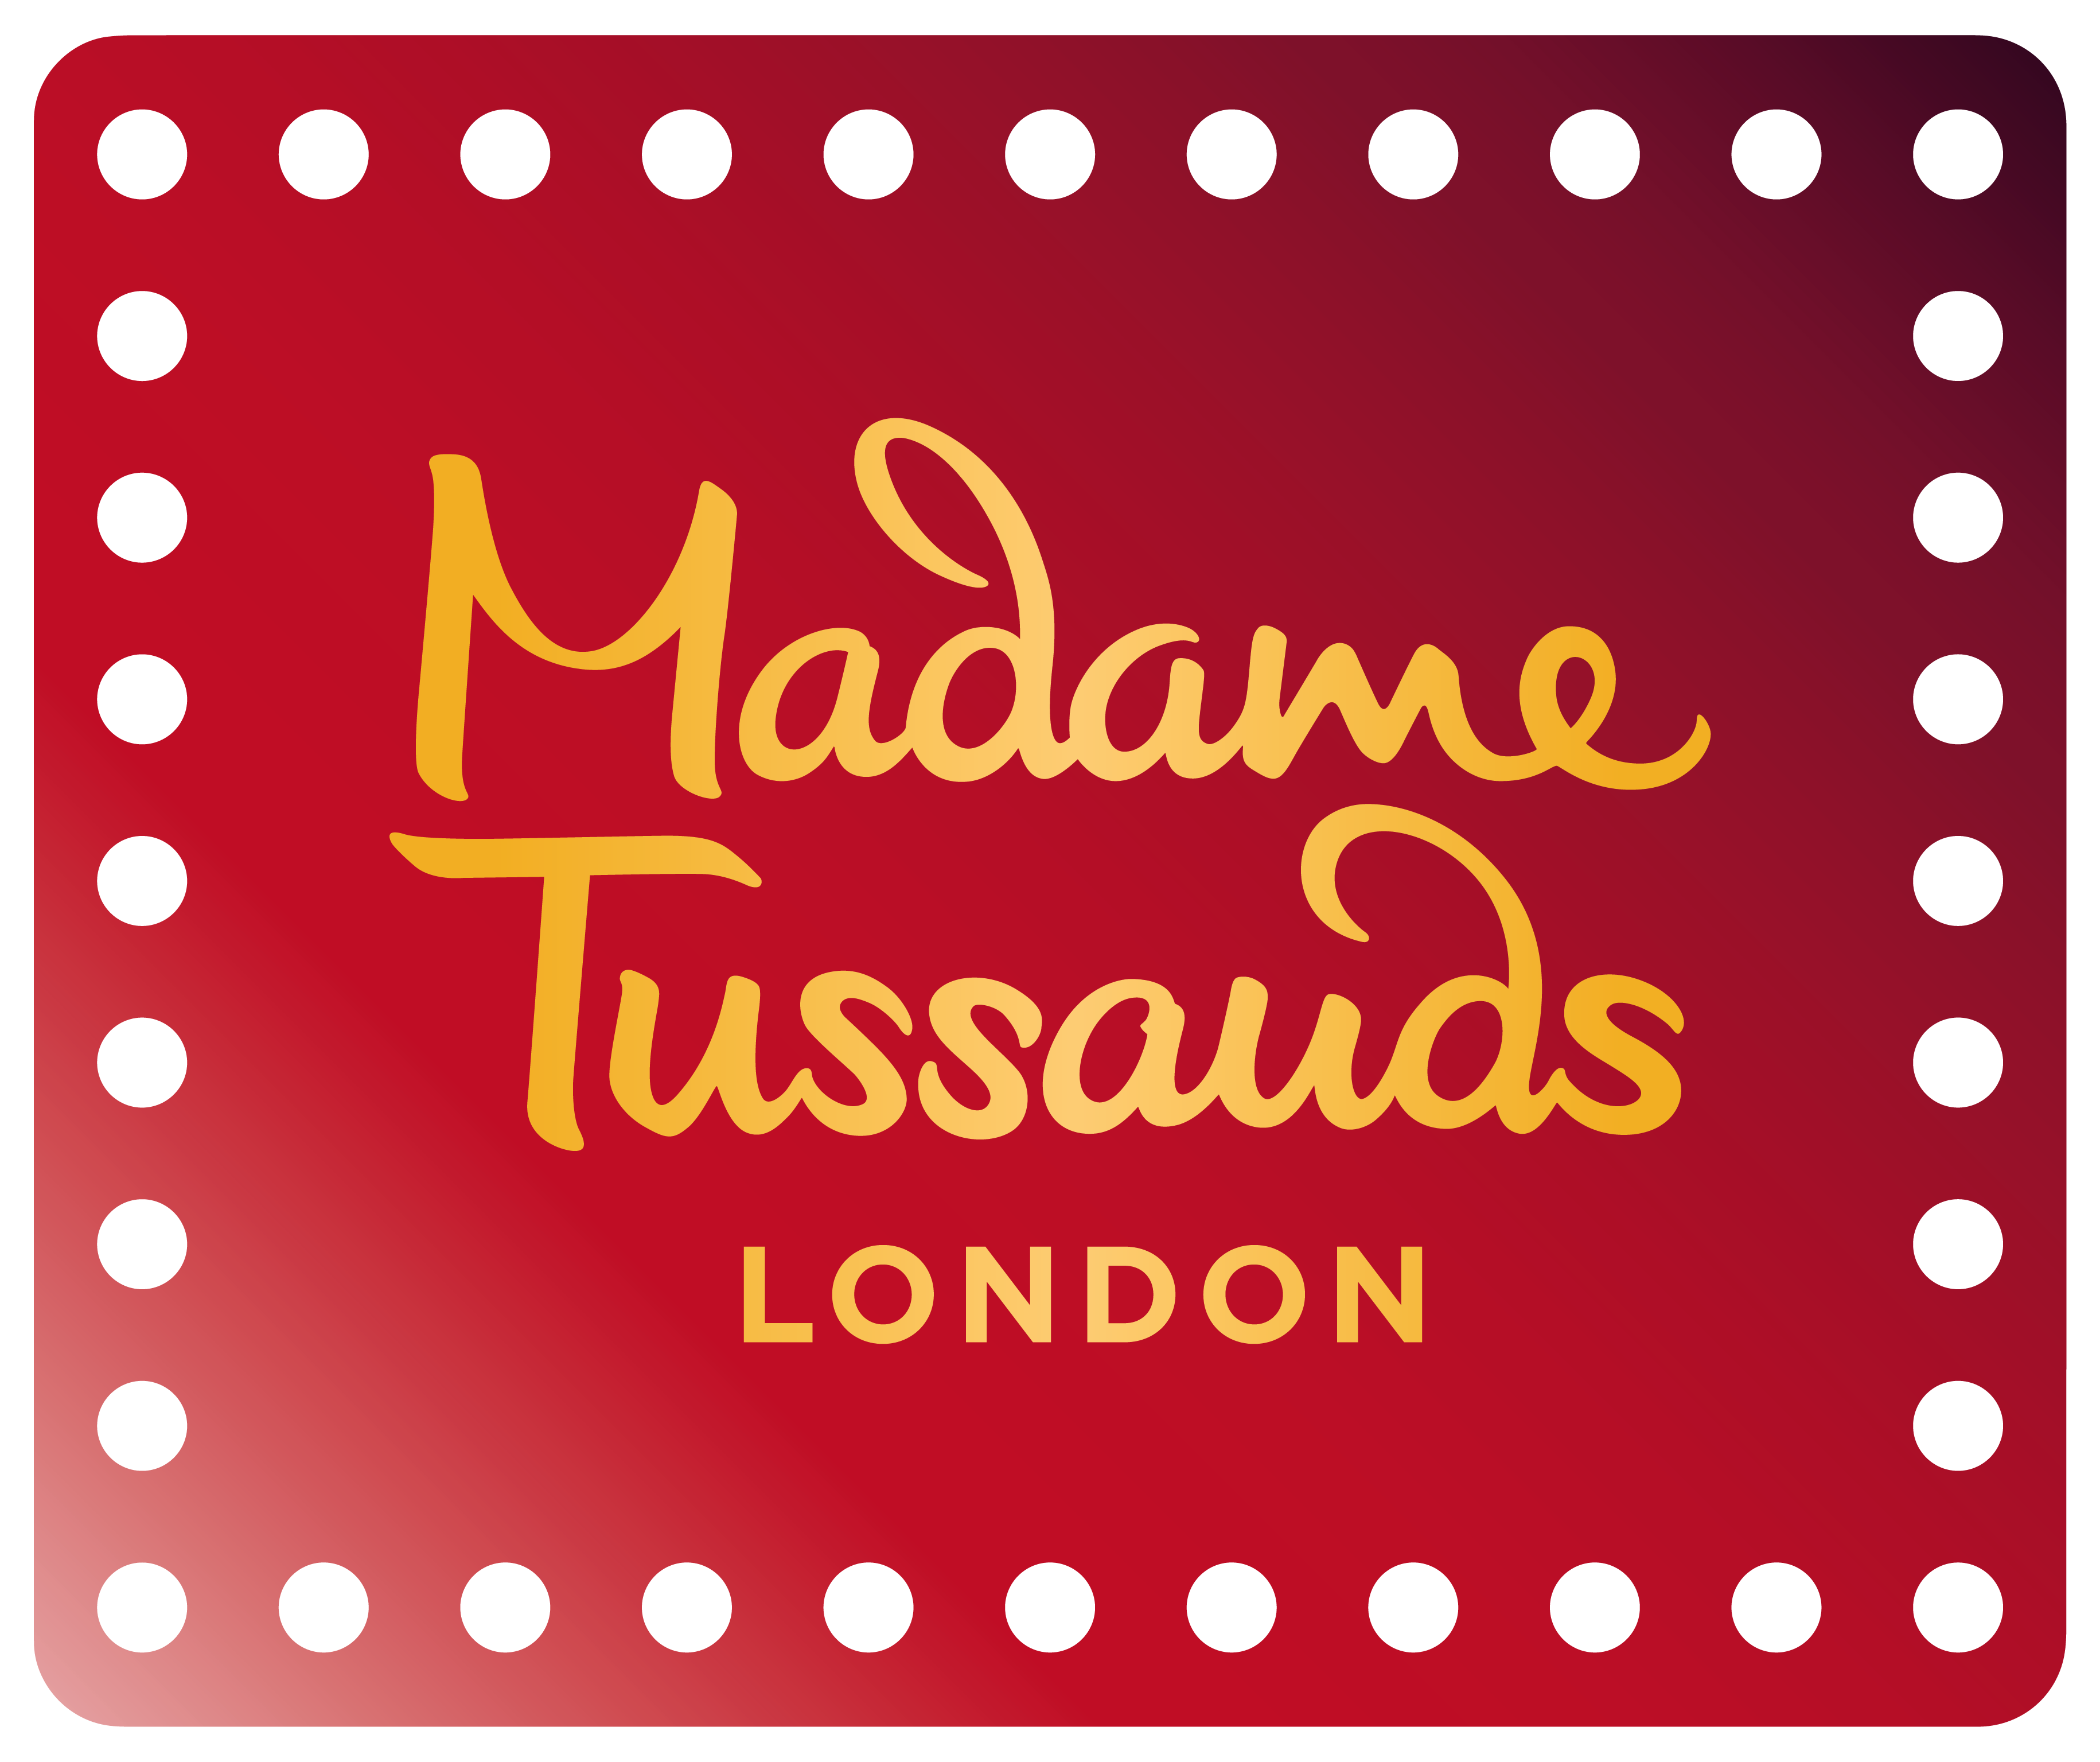 Madame Tussauds London logo in red